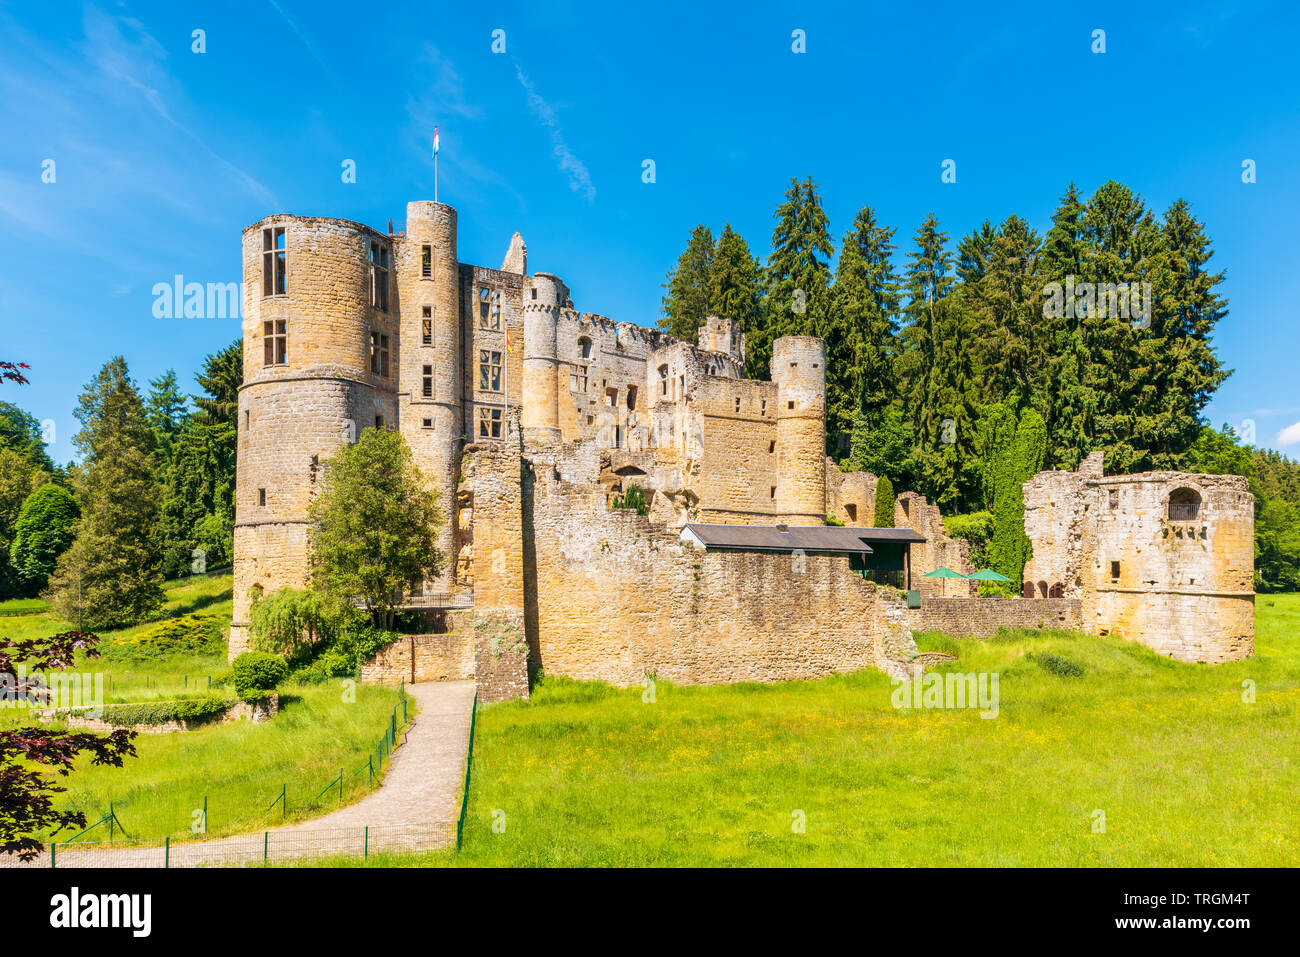 The Old Castle of Beaufort in Beaufort, Luxembourg. It consists of the ruins of a medieval fortress and dates back to the 11th century Stock Photo